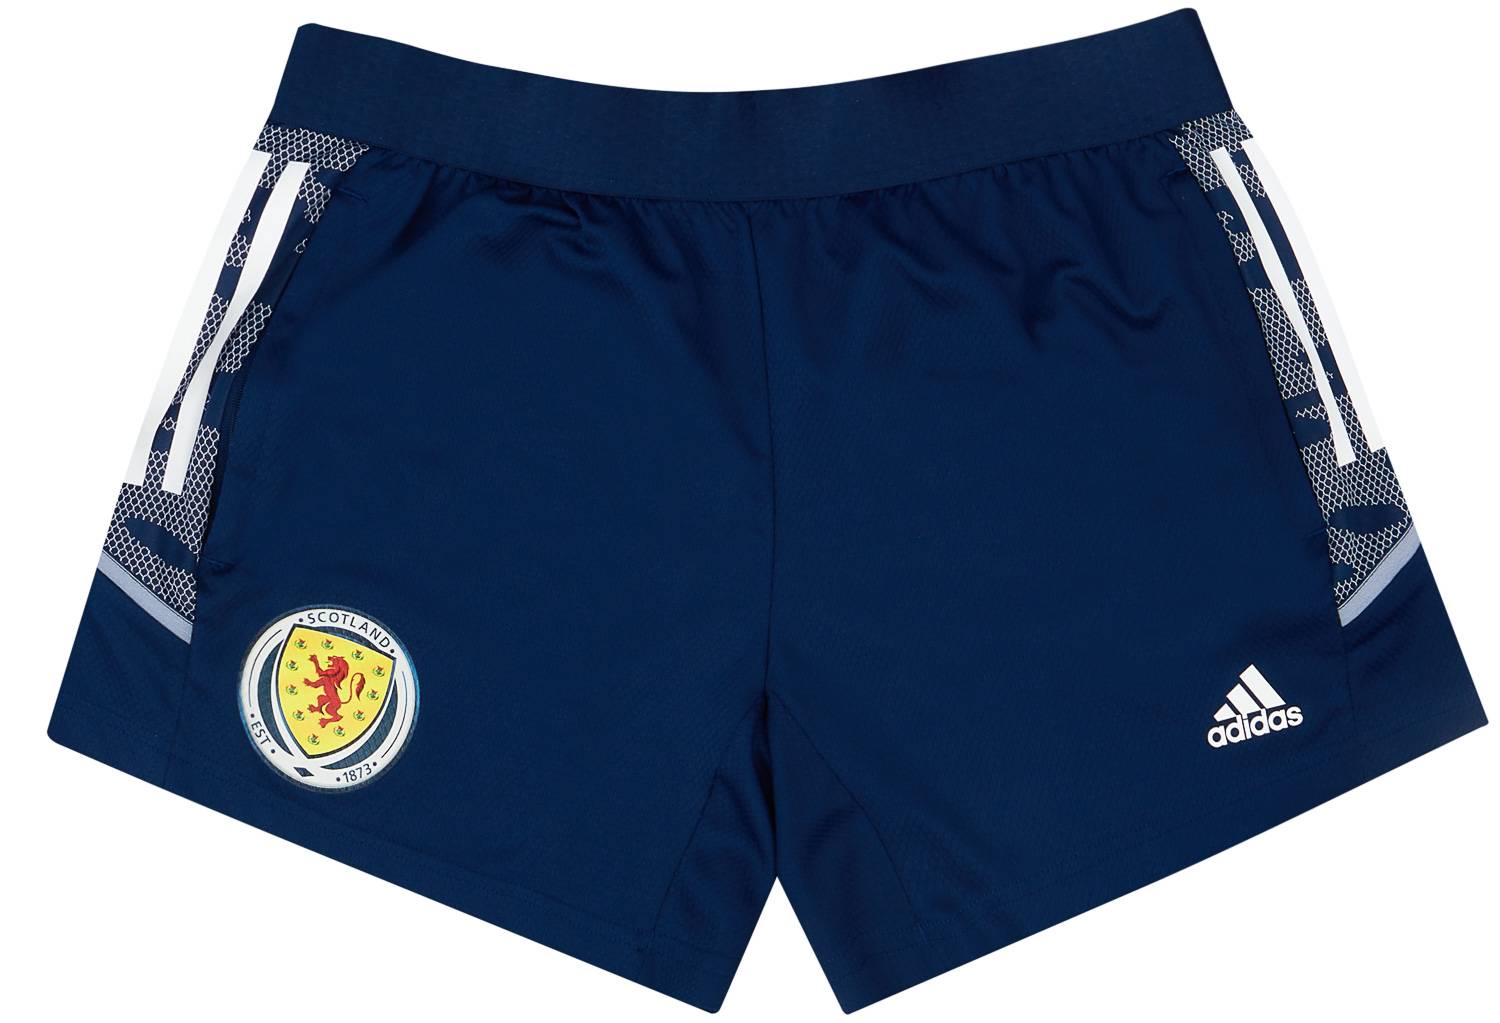 2021-22 Scotland Women's Player Issue Training Shorts (Excellent)